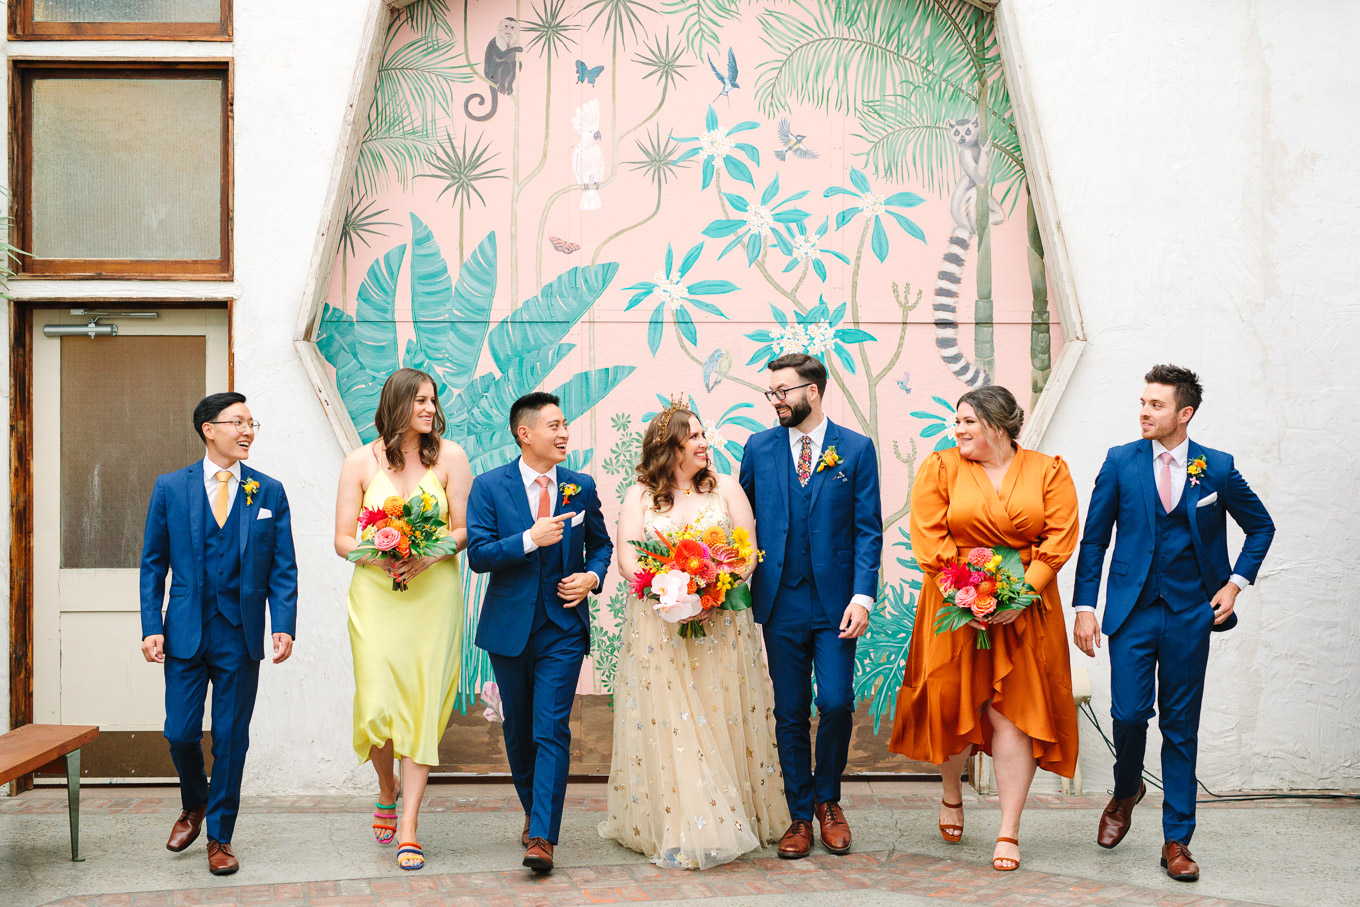 Colorful wedding party in front of mural | Colorful Downtown Los Angeles Valentine Wedding | Los Angeles wedding photographer | #losangeleswedding #colorfulwedding #DTLA #valentinedtla   Source: Mary Costa Photography | Los Angeles